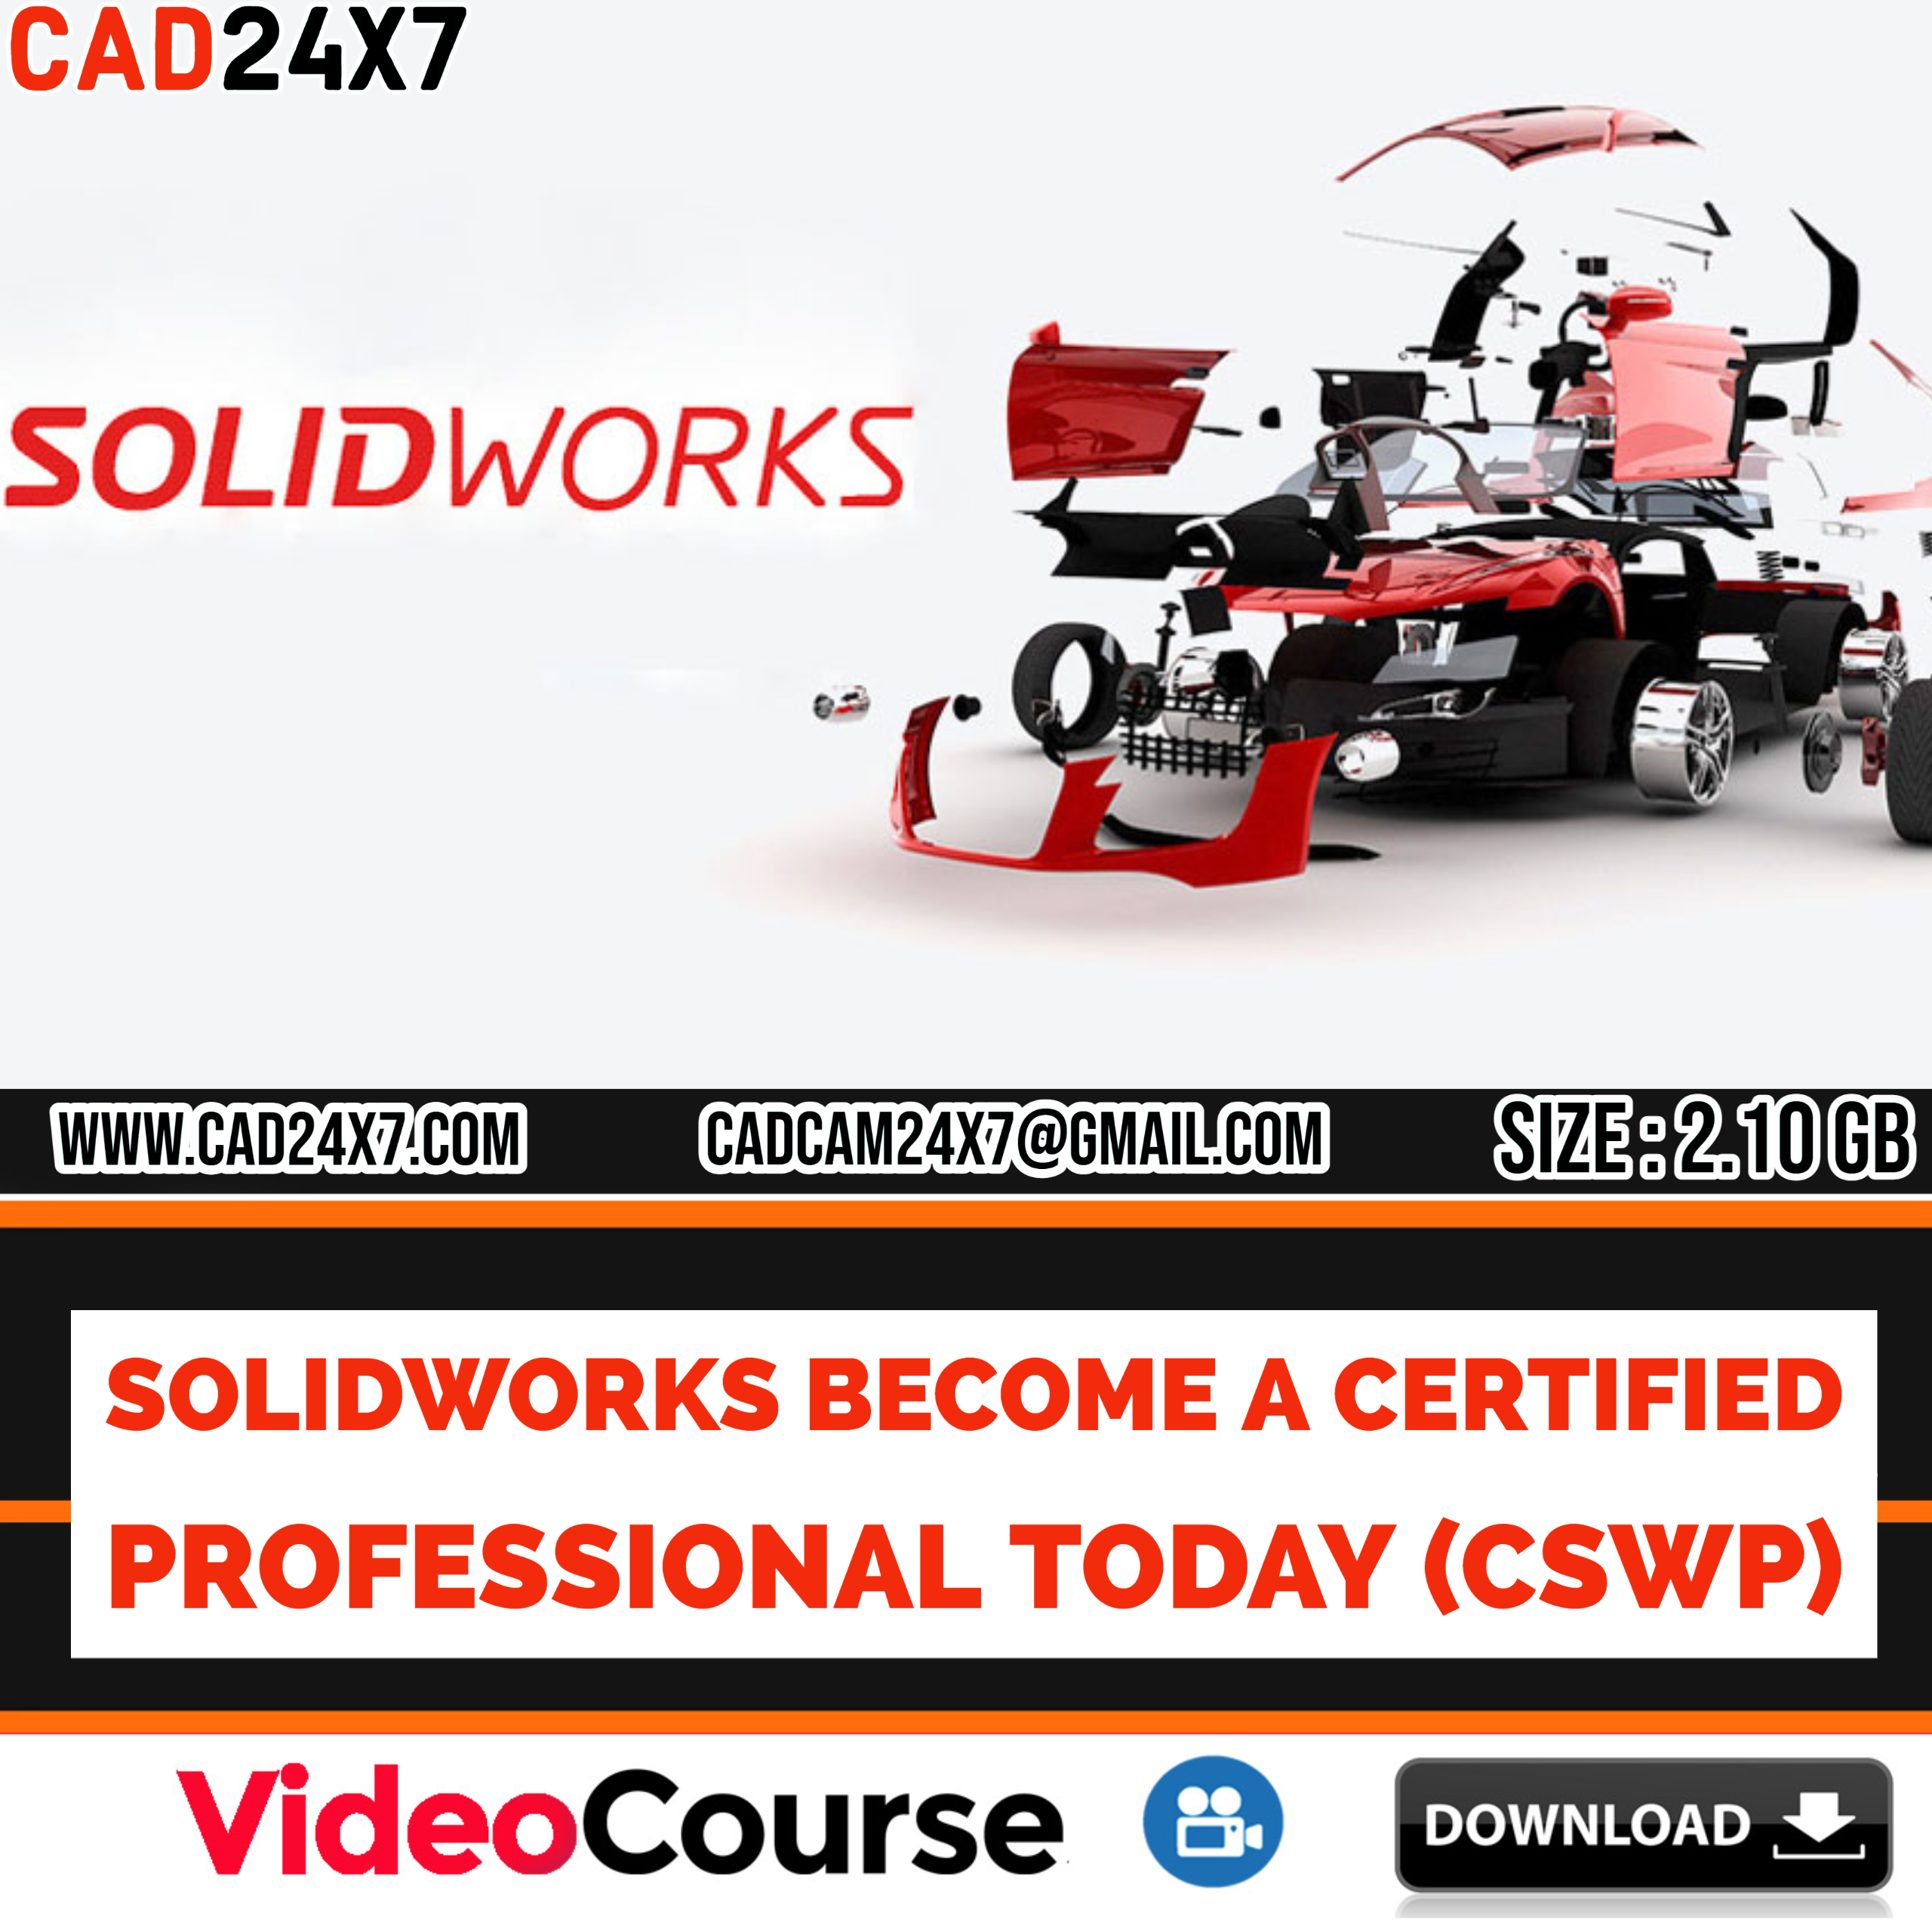 SOLIDWORKS-Become-a-Certified-Professional-Today-(CSWP)